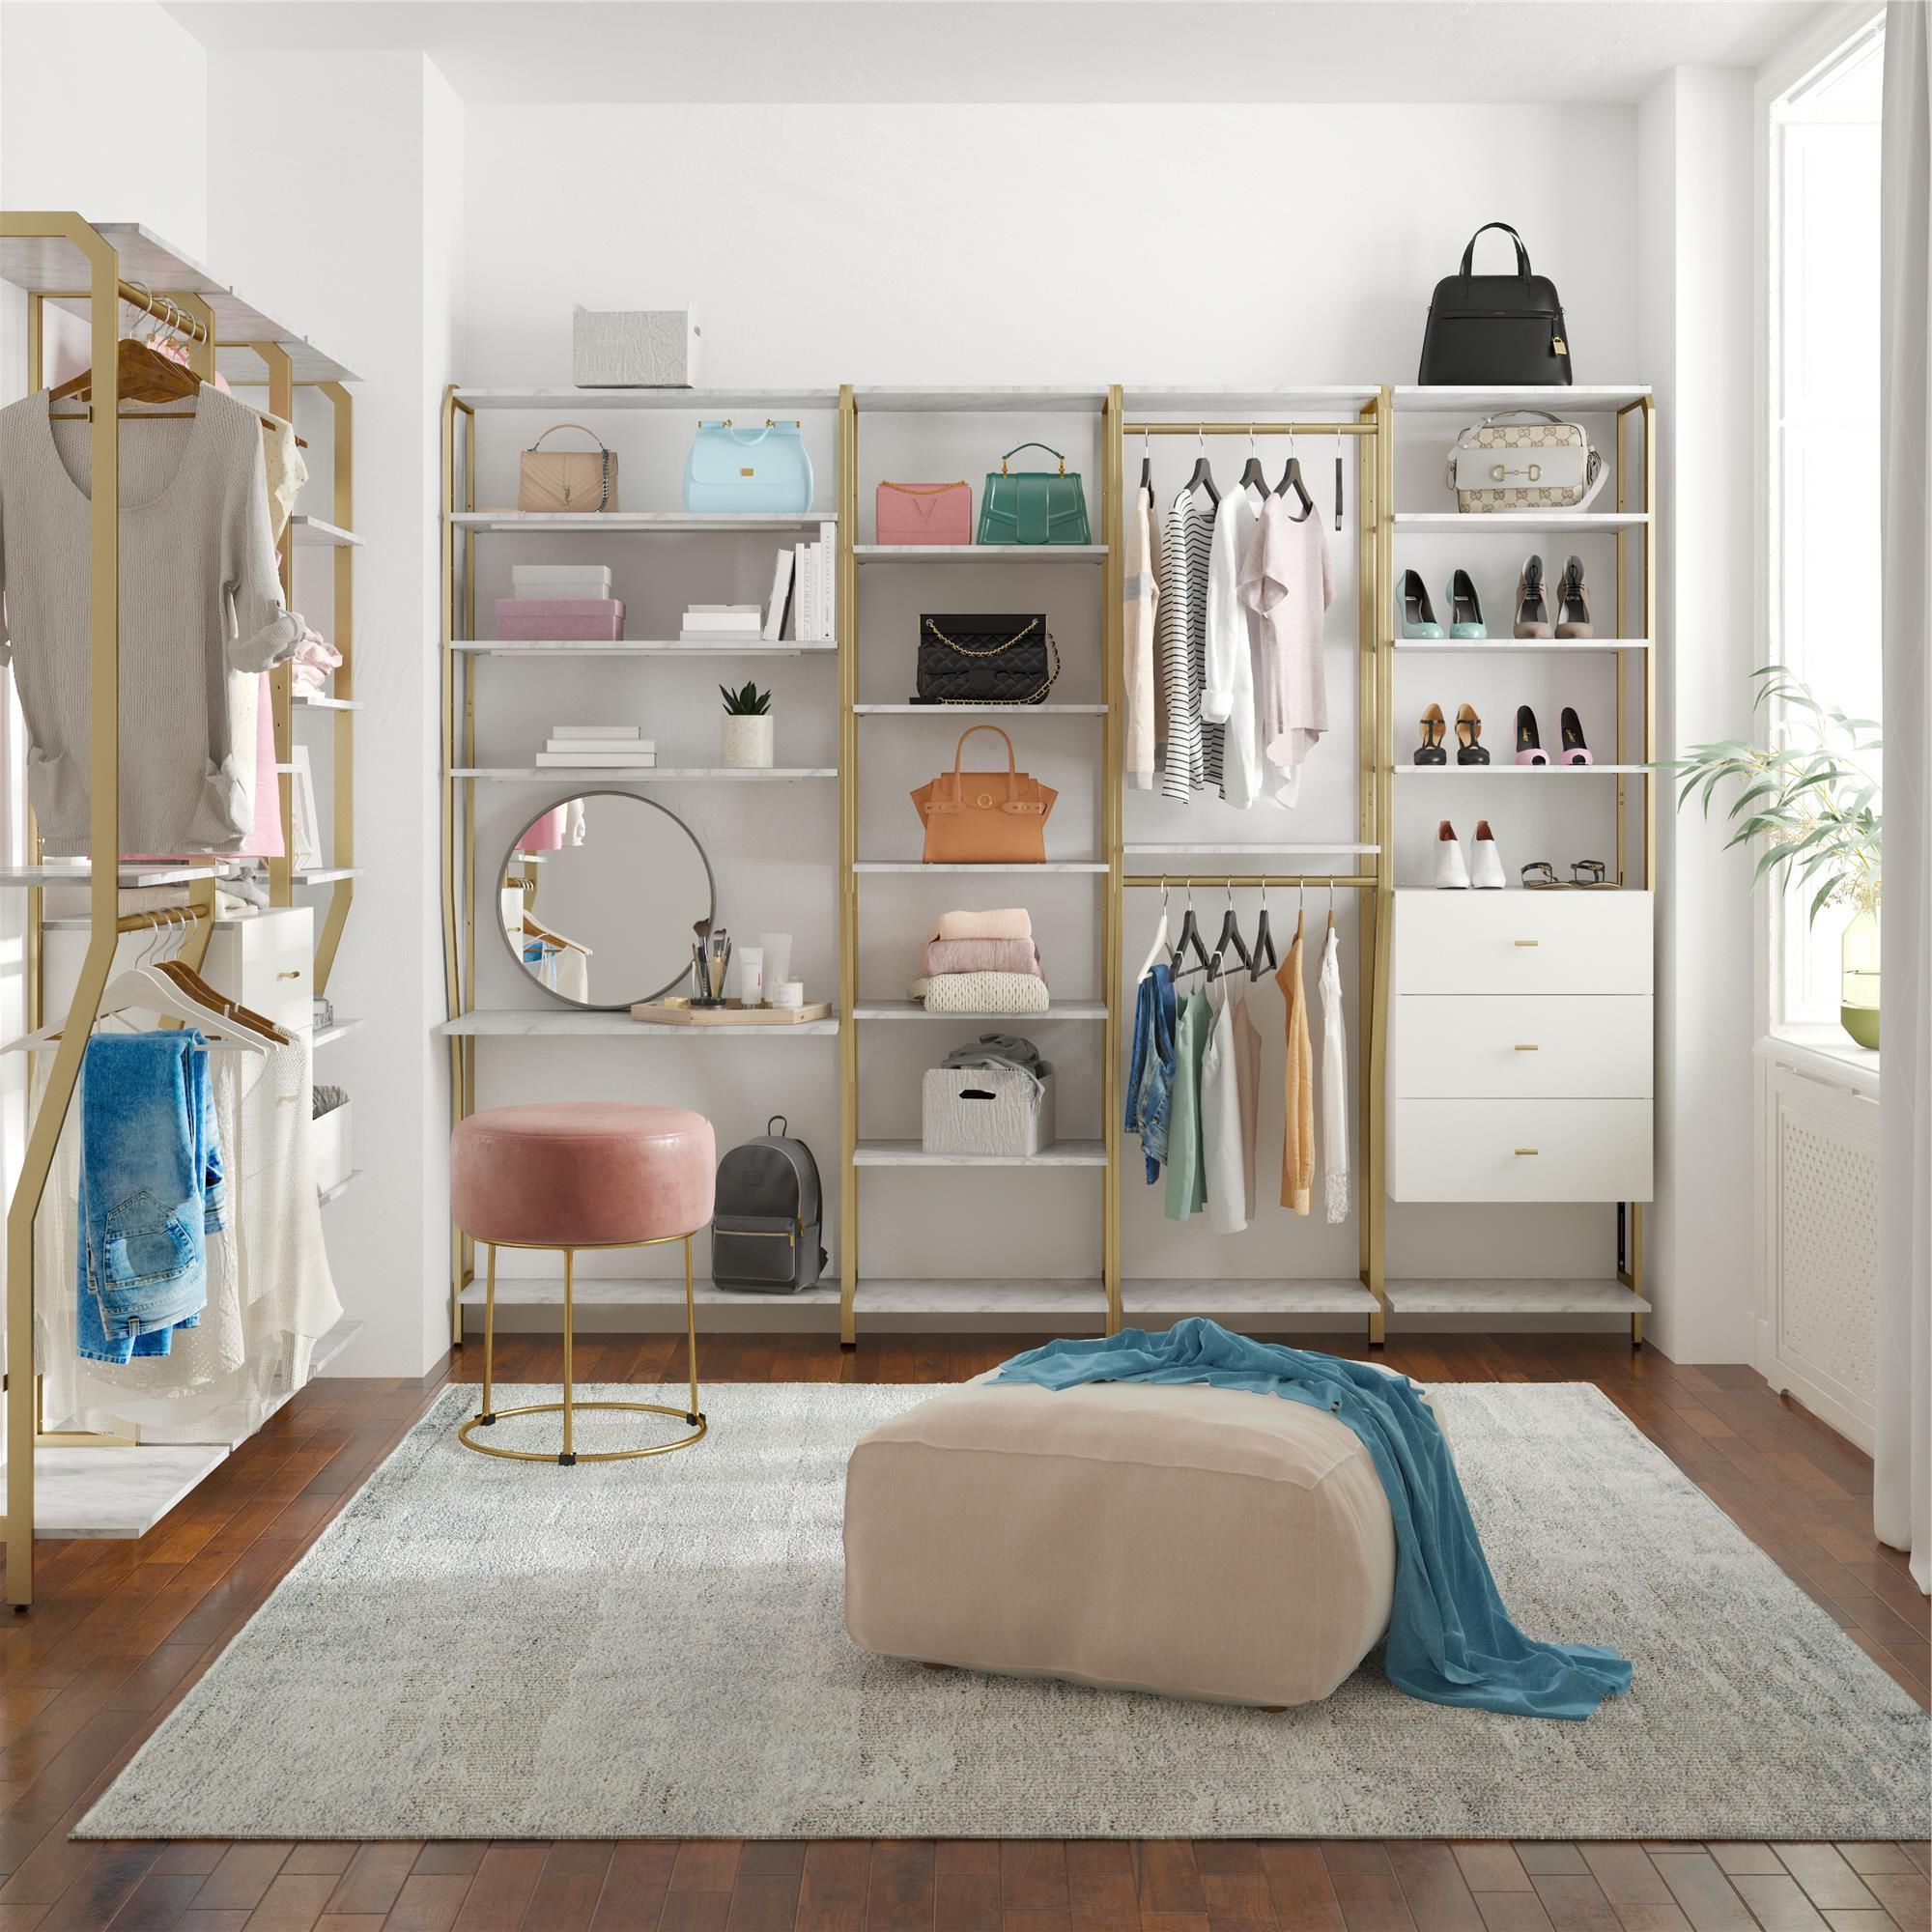 6 Shelf Wardrobes For Most Current Gwyneth Closet System With 6 Shelves (View 9 of 10)